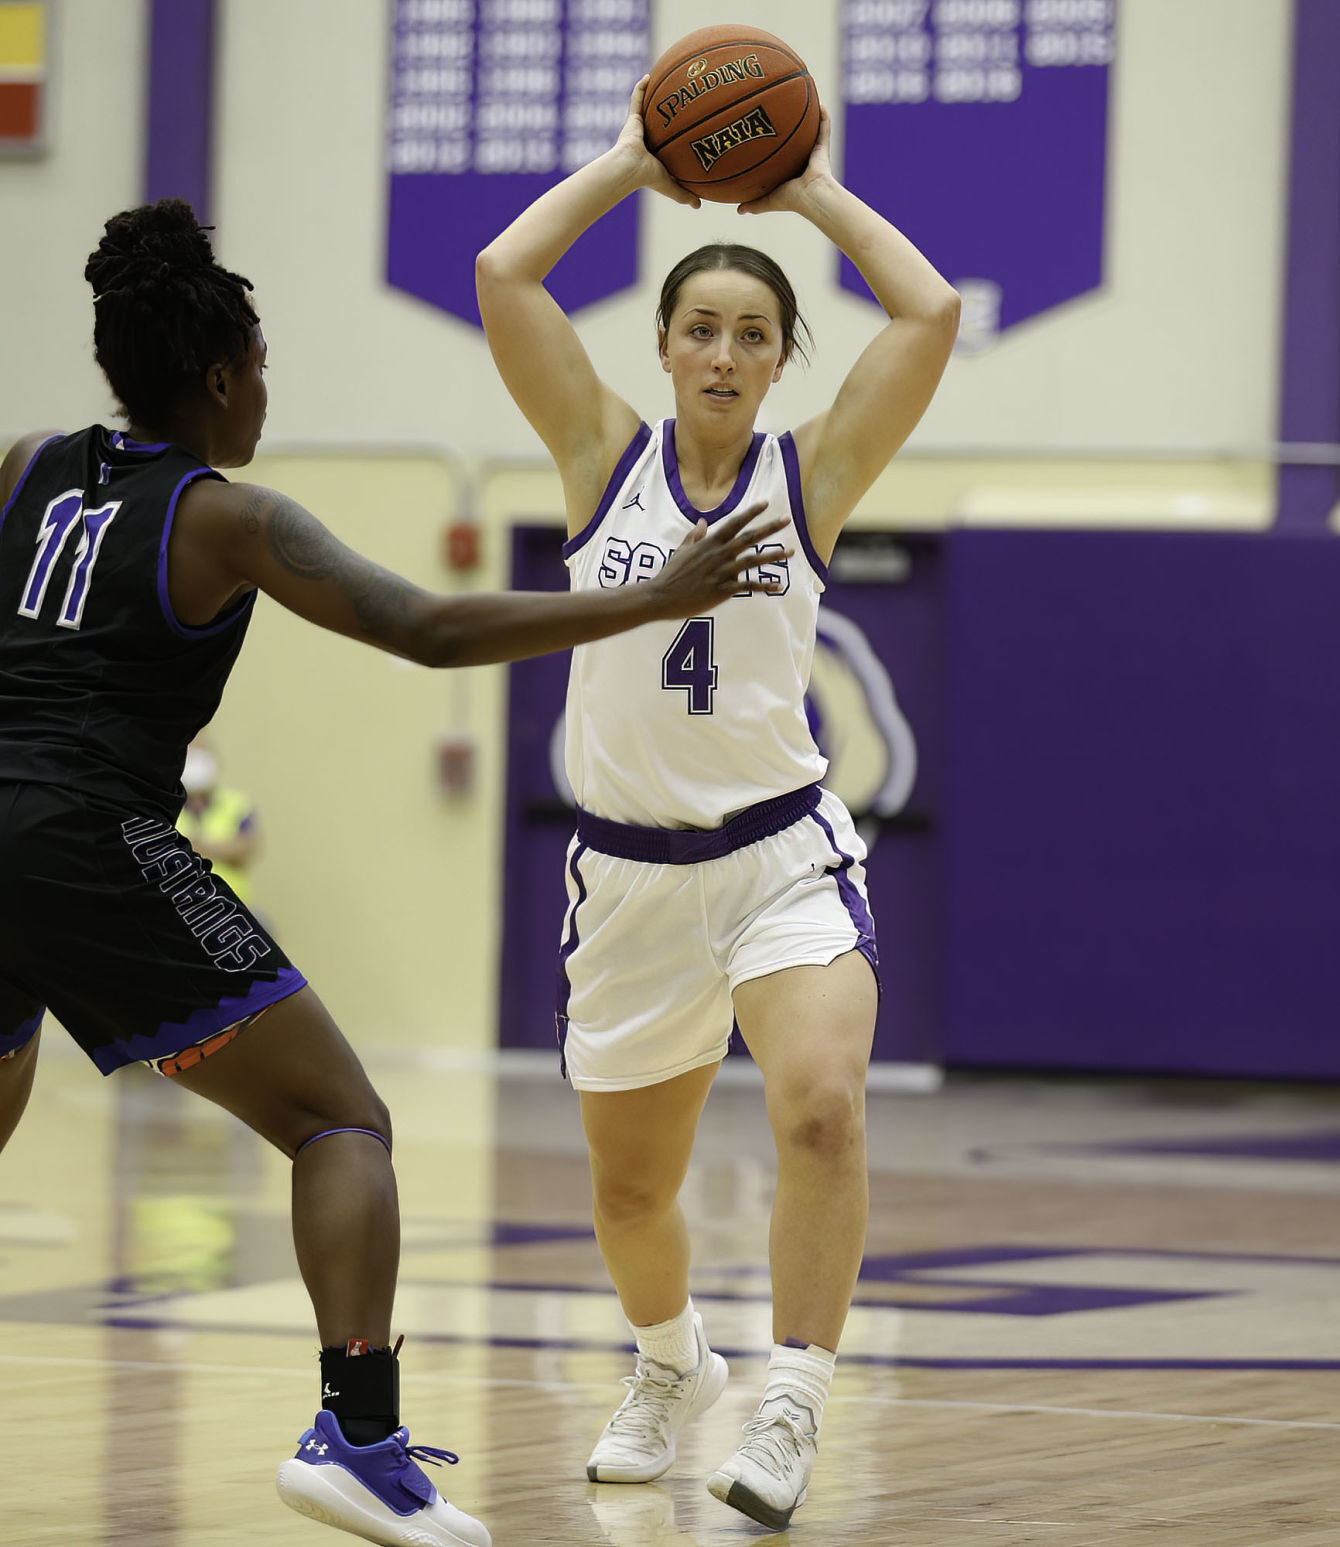 Carroll racks up 24 assists in win over Central Baptist